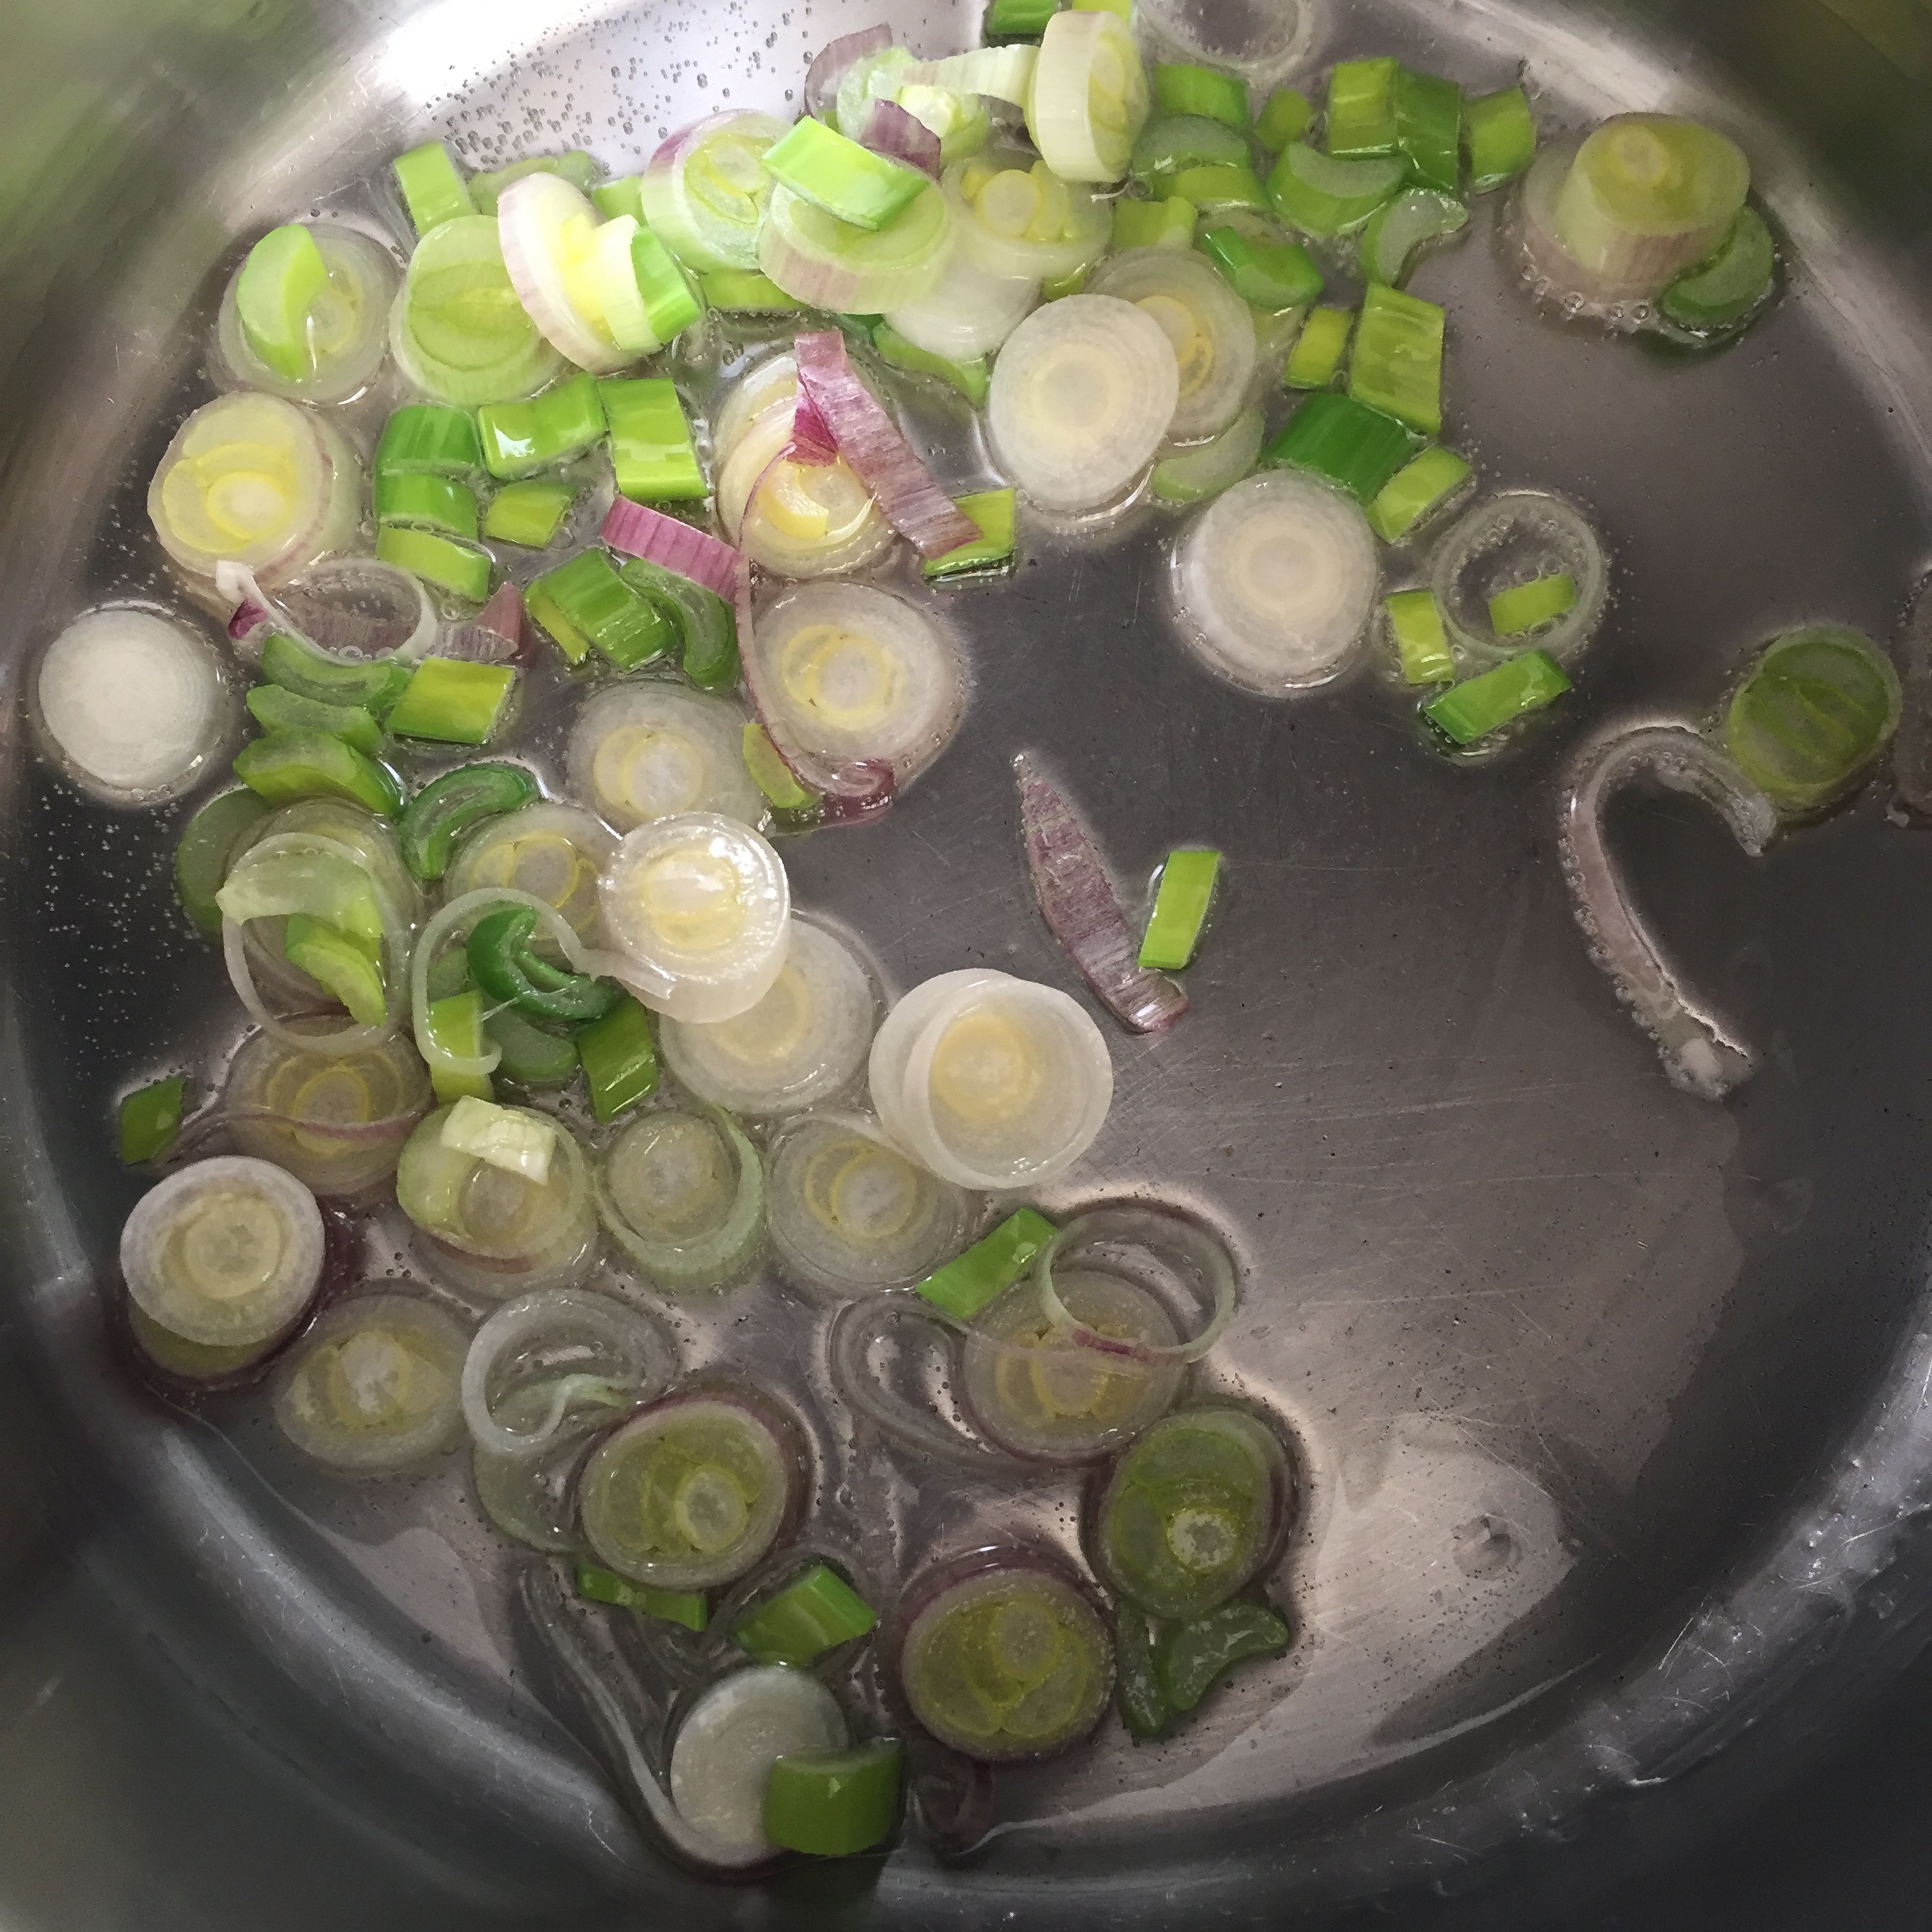 Coat the bottom of a pot with oil, and add finely sliced green onion. Fry until lightly transluscent